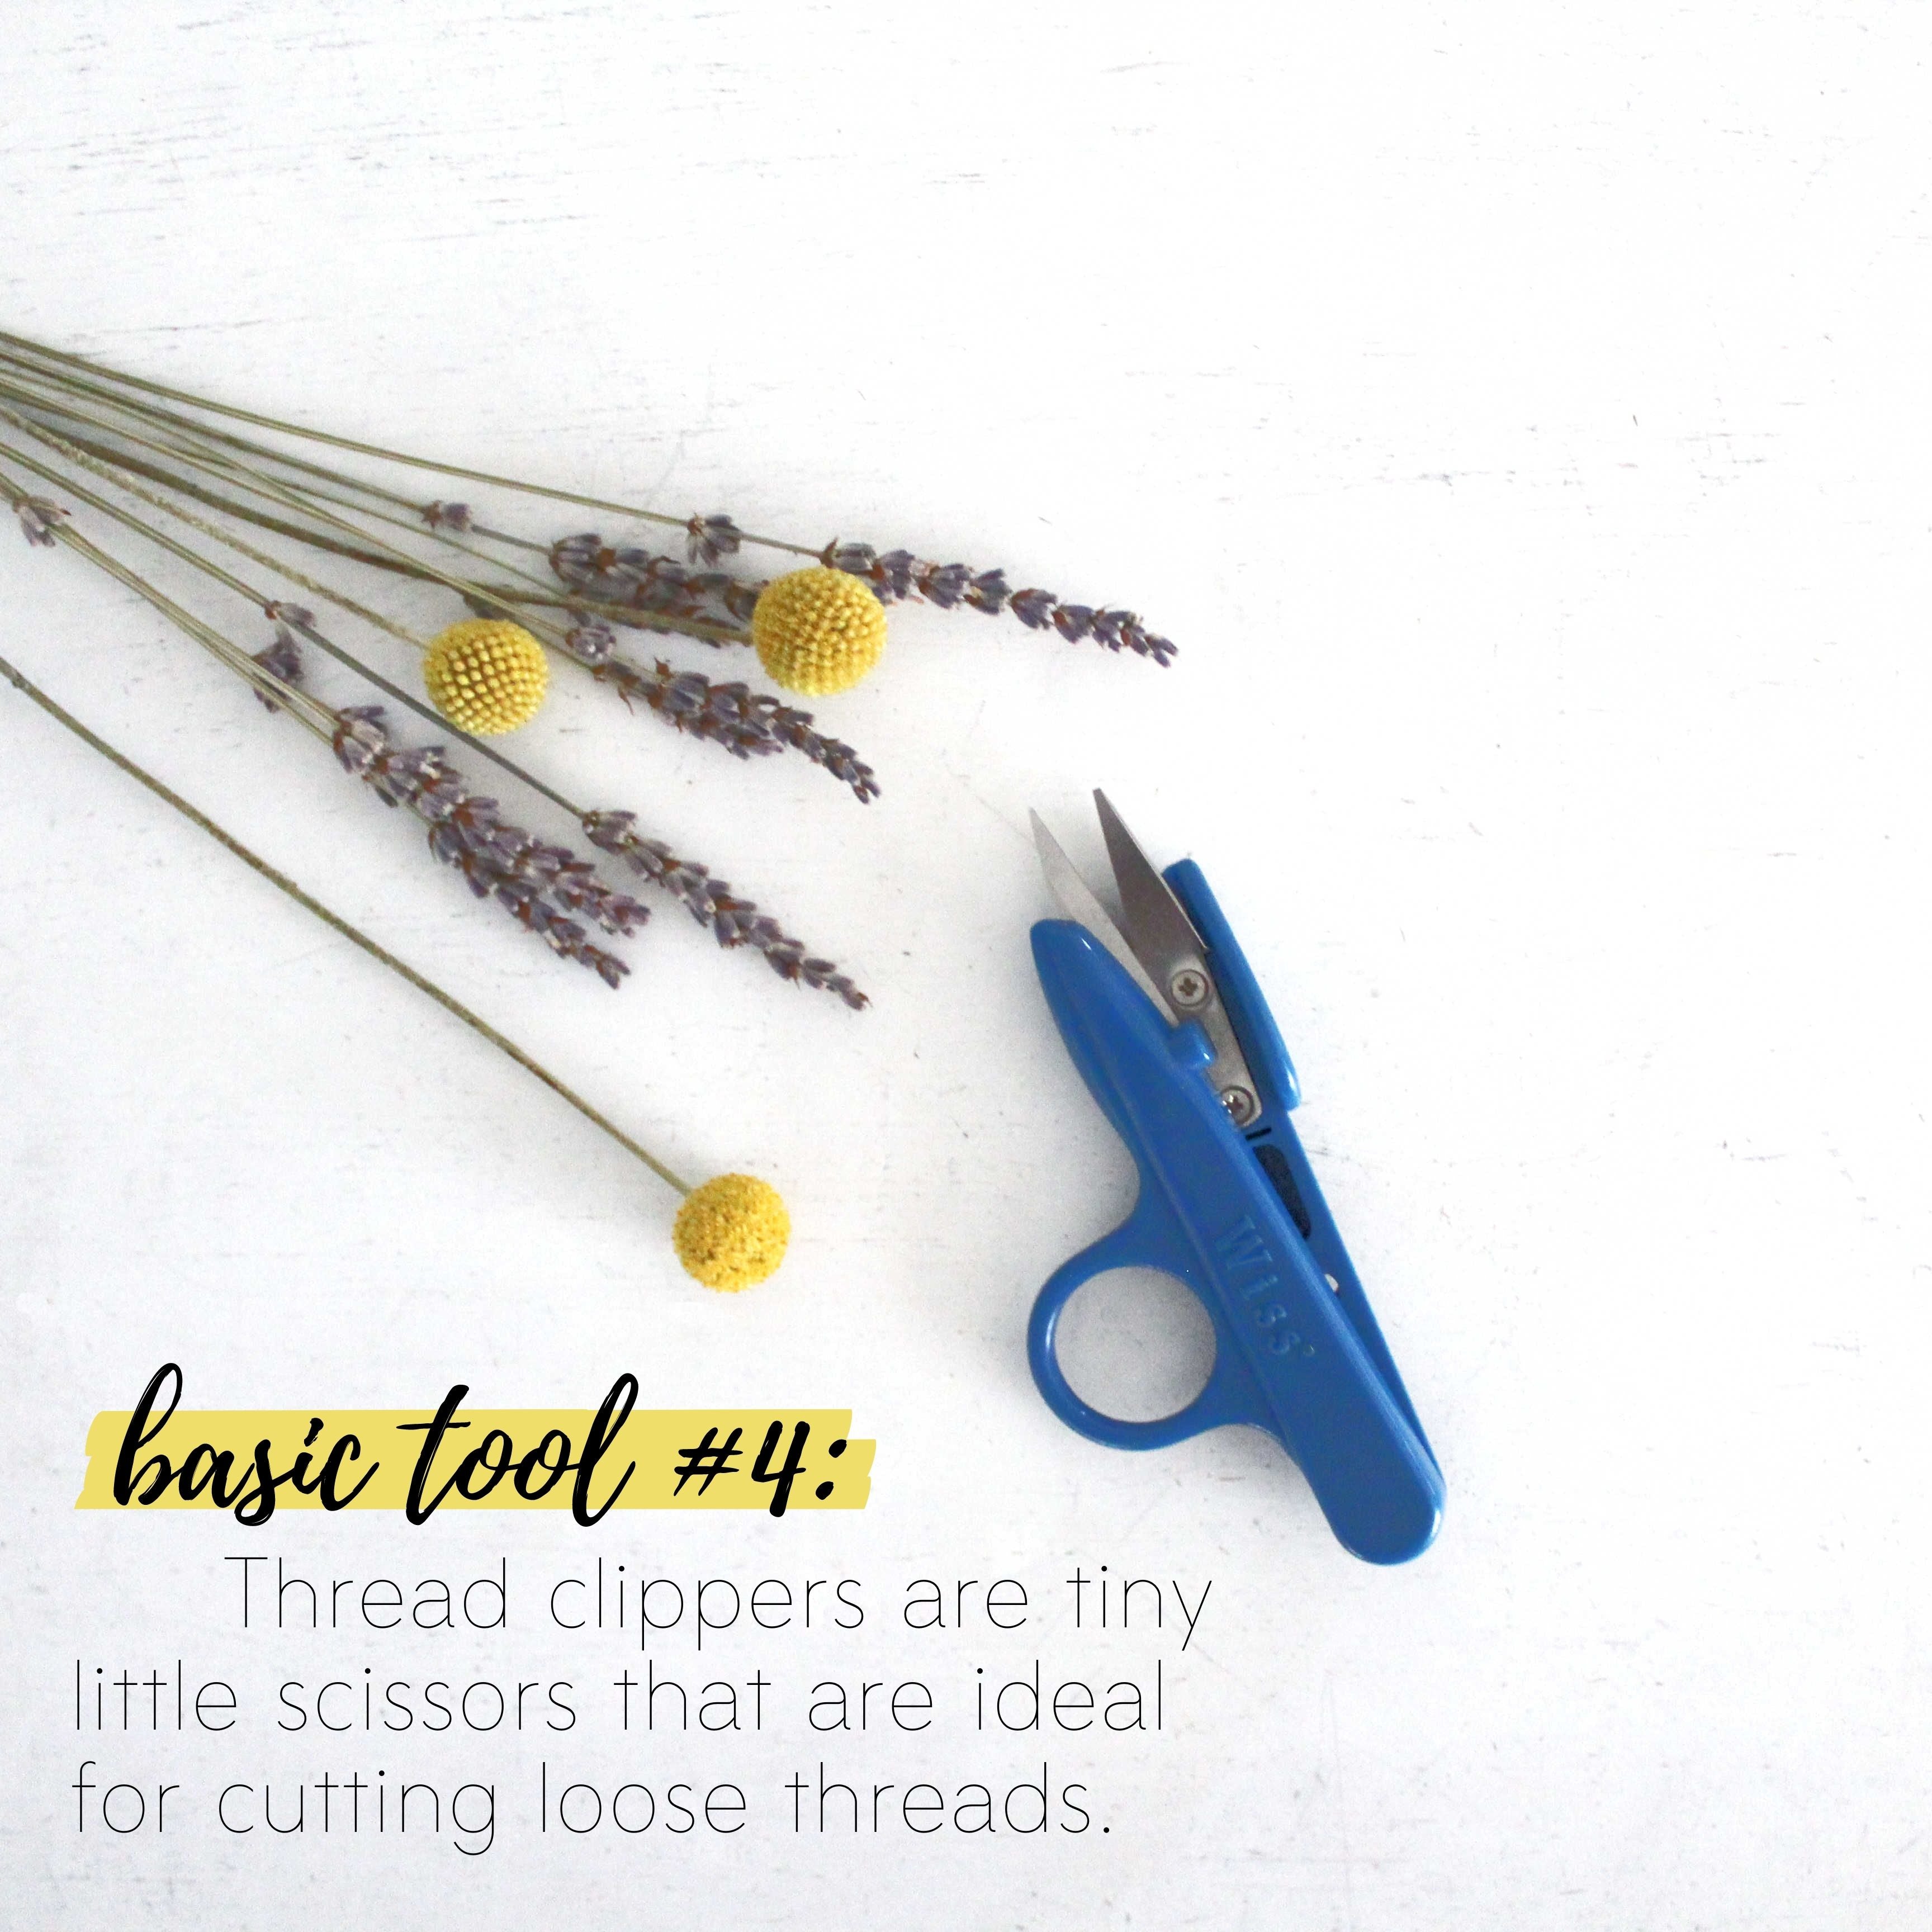 How To Build A Sewing Kit: Basic Tool #4, Thread Clipper